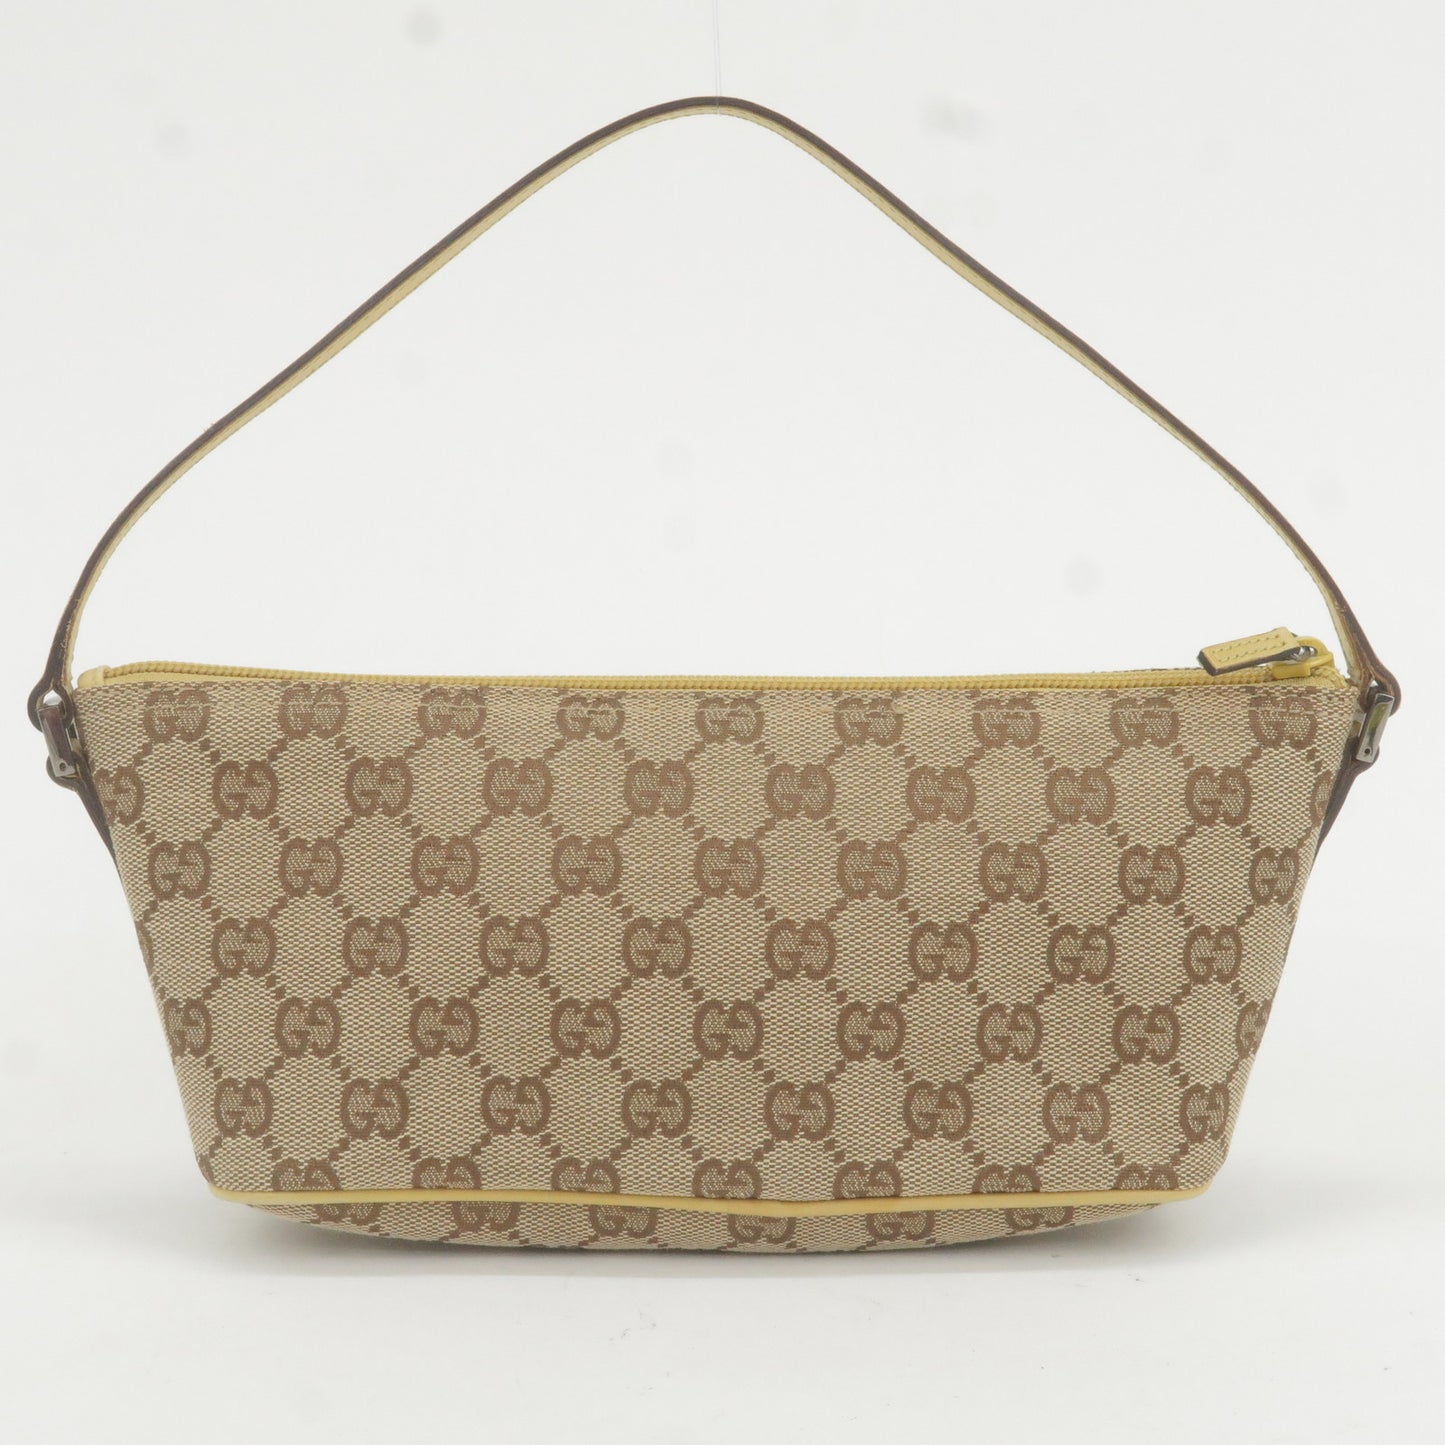 GUCCI GG Canvas Leather Boat Bag Hand Bag Beige Yellow 07198